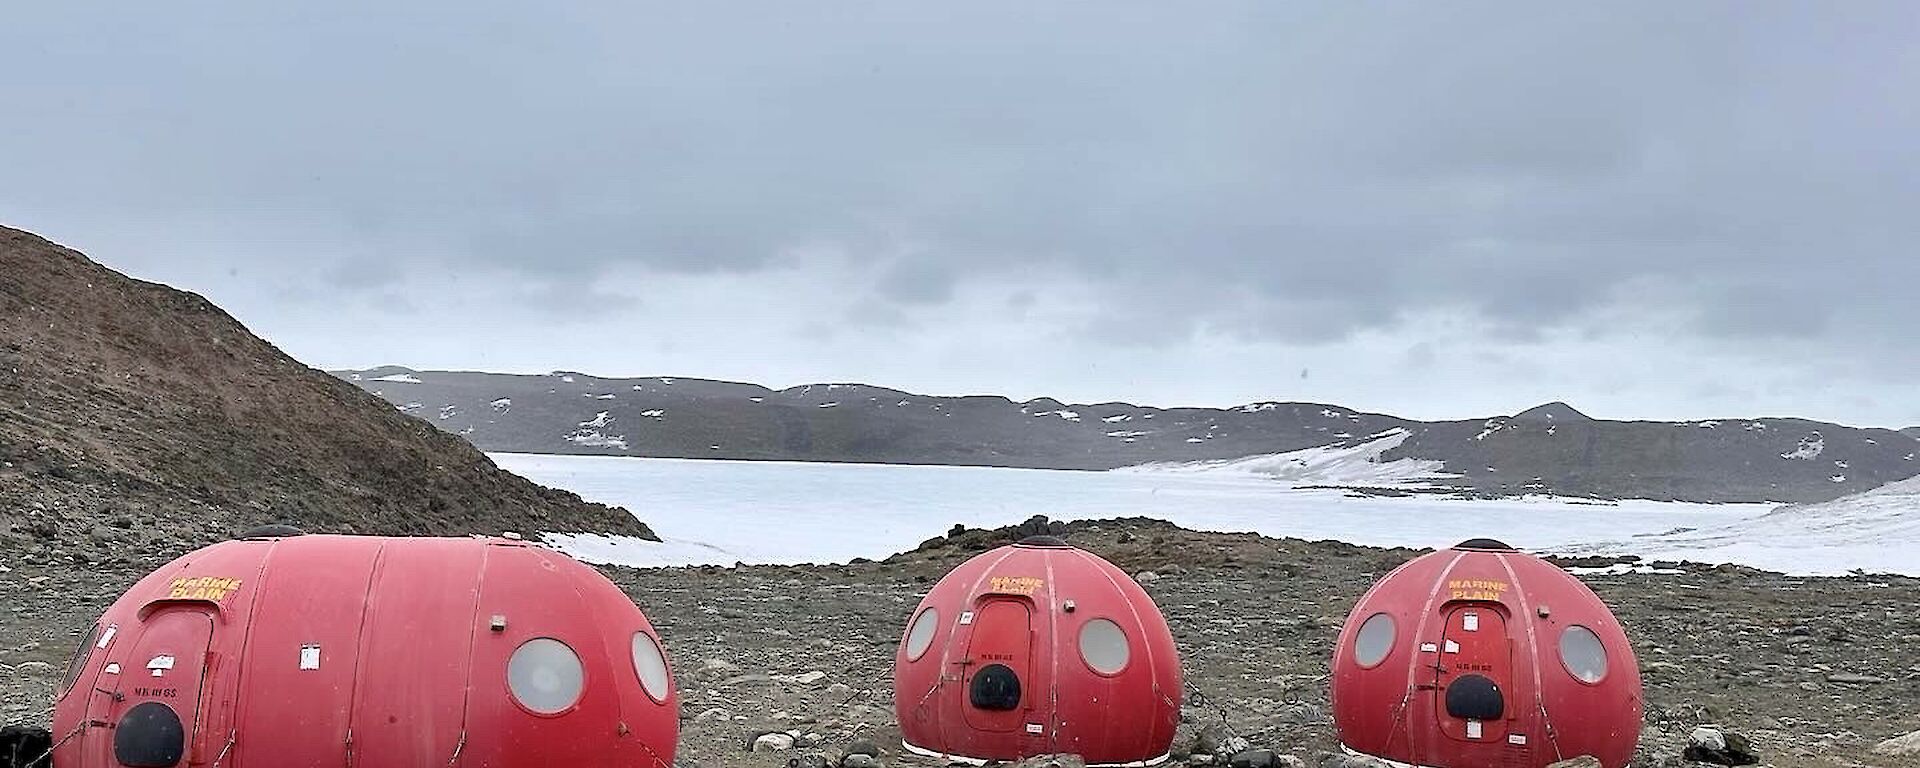 Two round red fibreglass huts and an oblong one sit on a rocky plain with snow in the background